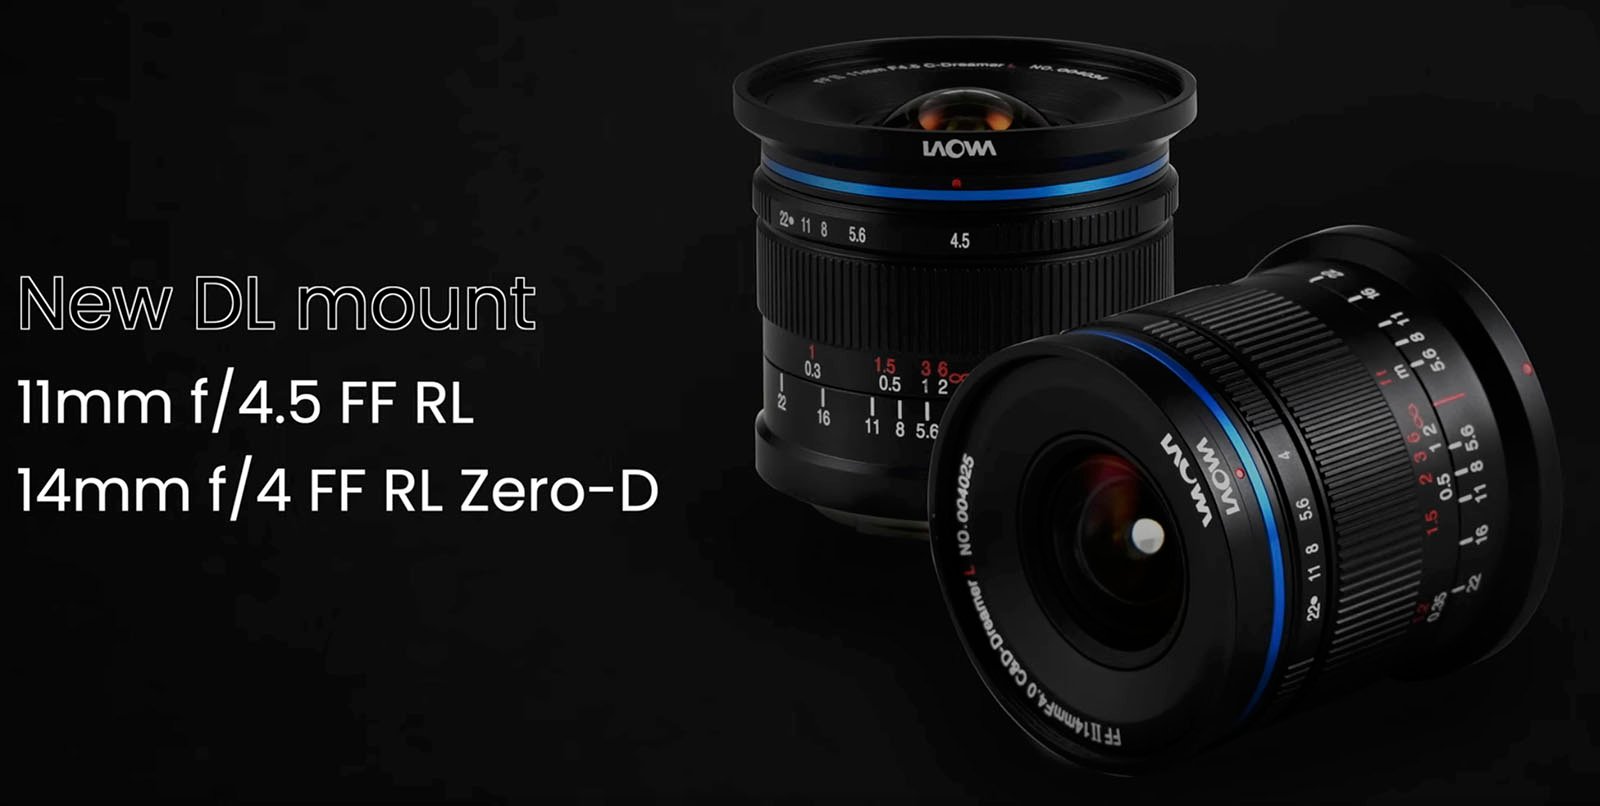 Two wide-angle camera lenses displayed on a black background, labeled as 11mm f/4.5 ff rl and 14mm f/4 ff rl zero-d for the new dl mount.